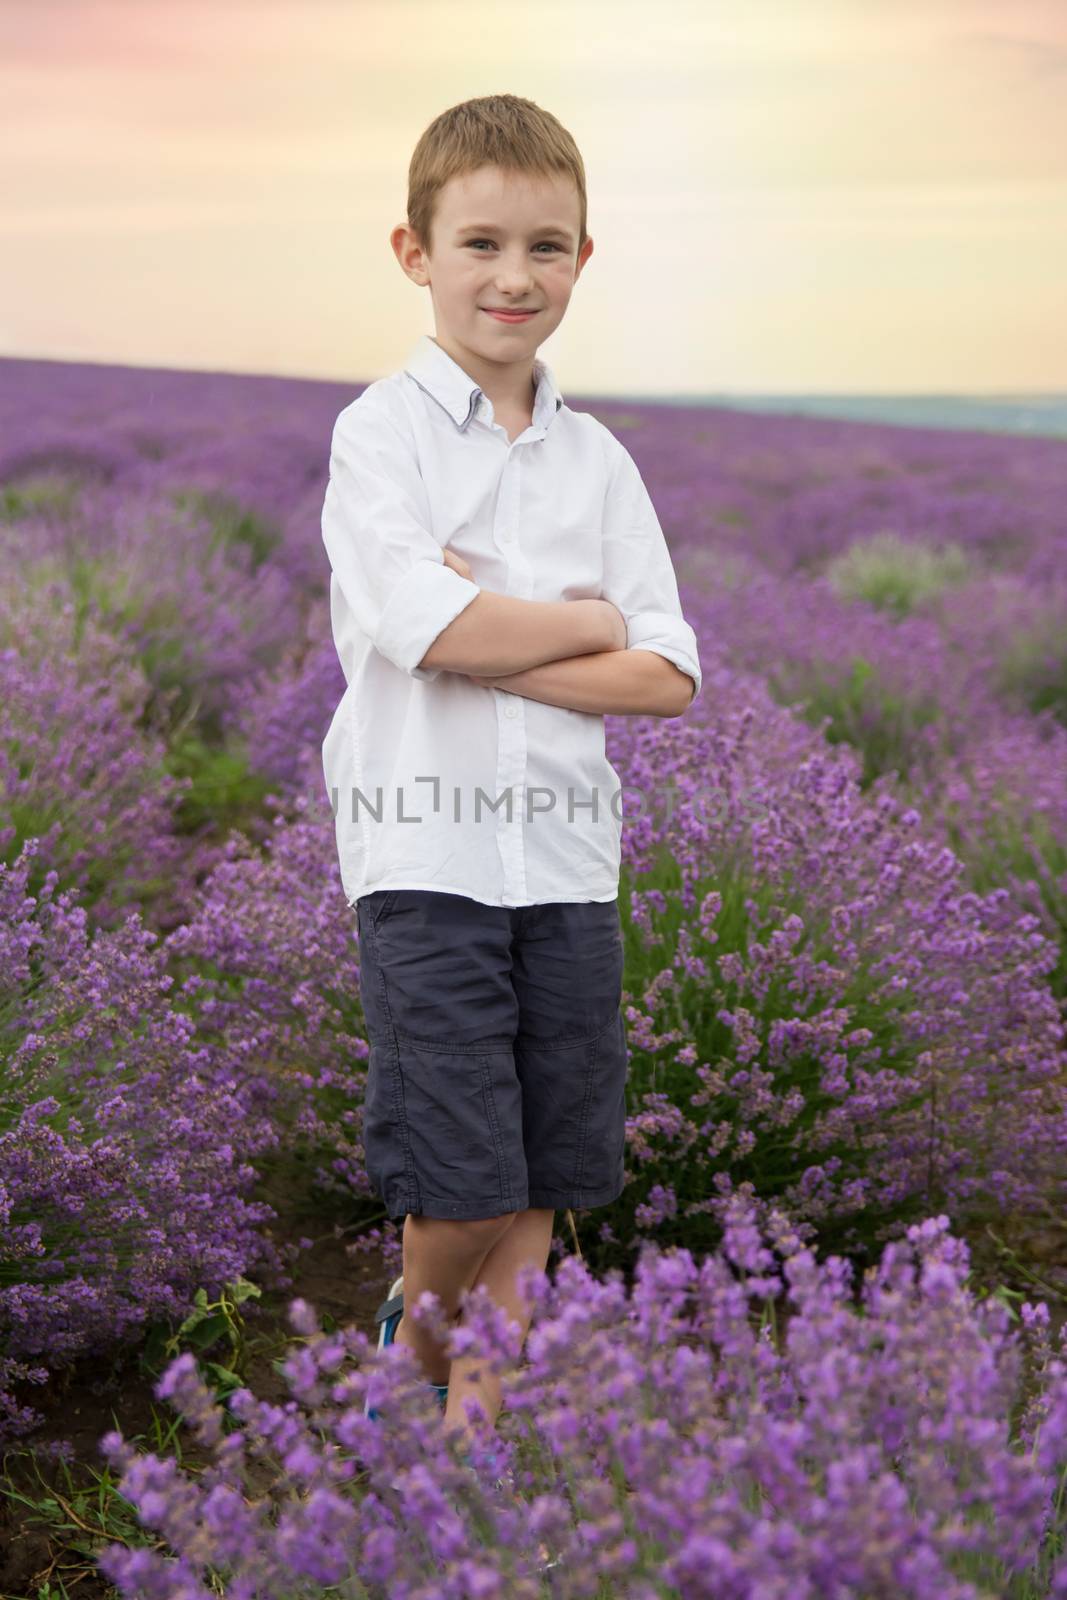 Smiling boy in avender field sunset by Angel_a